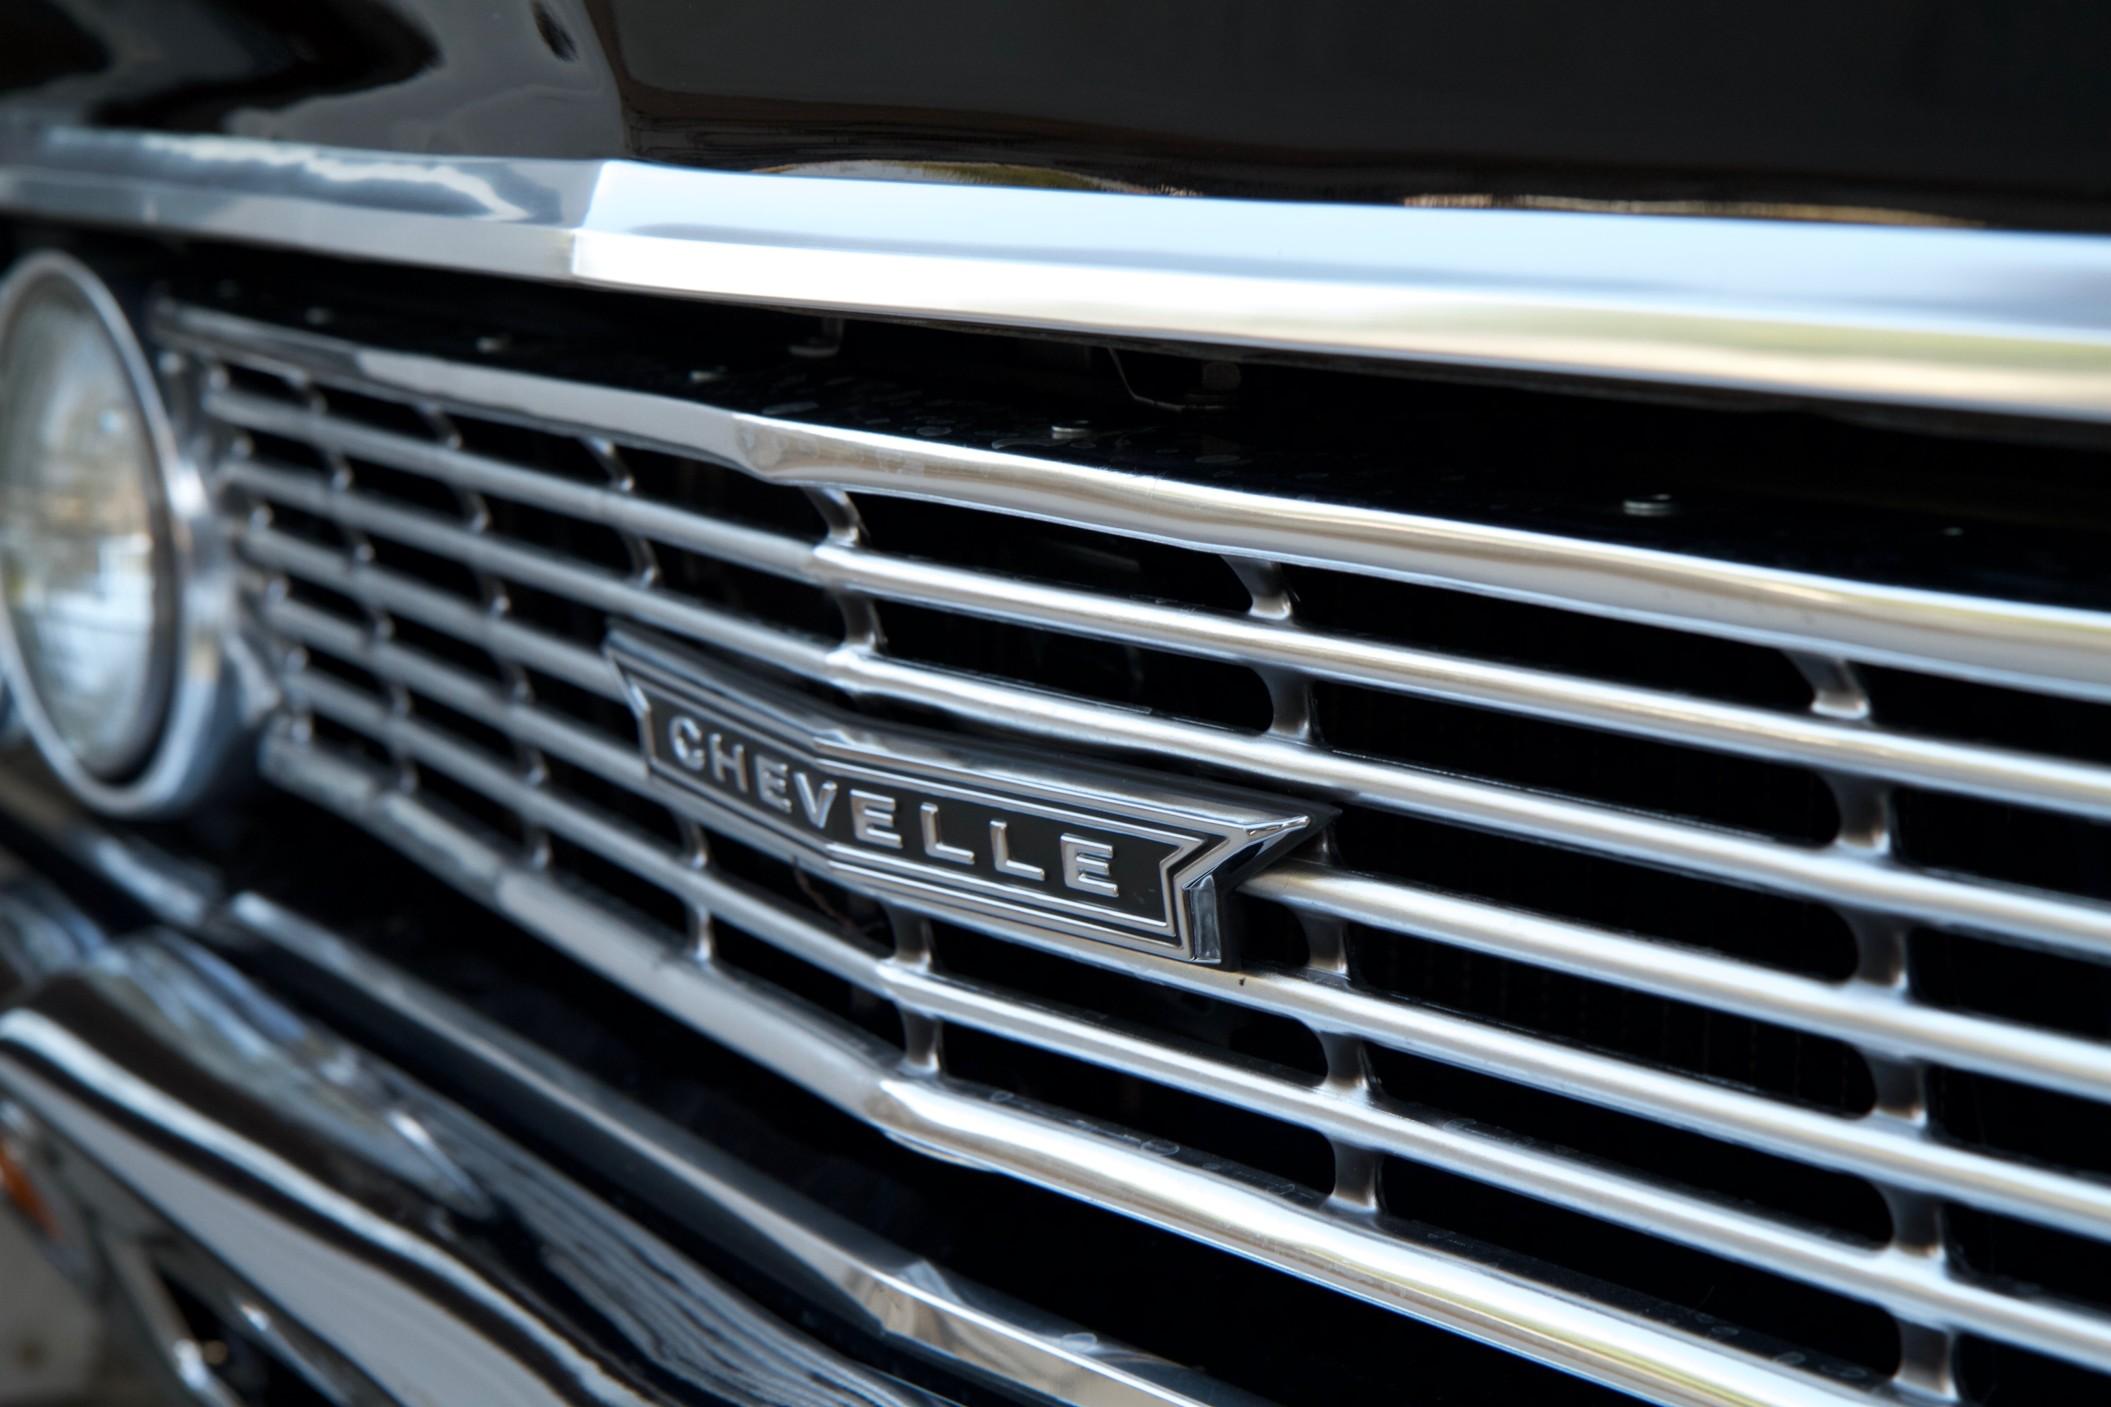 The front end headlights and grill of a classic Chevrolet Chevelle